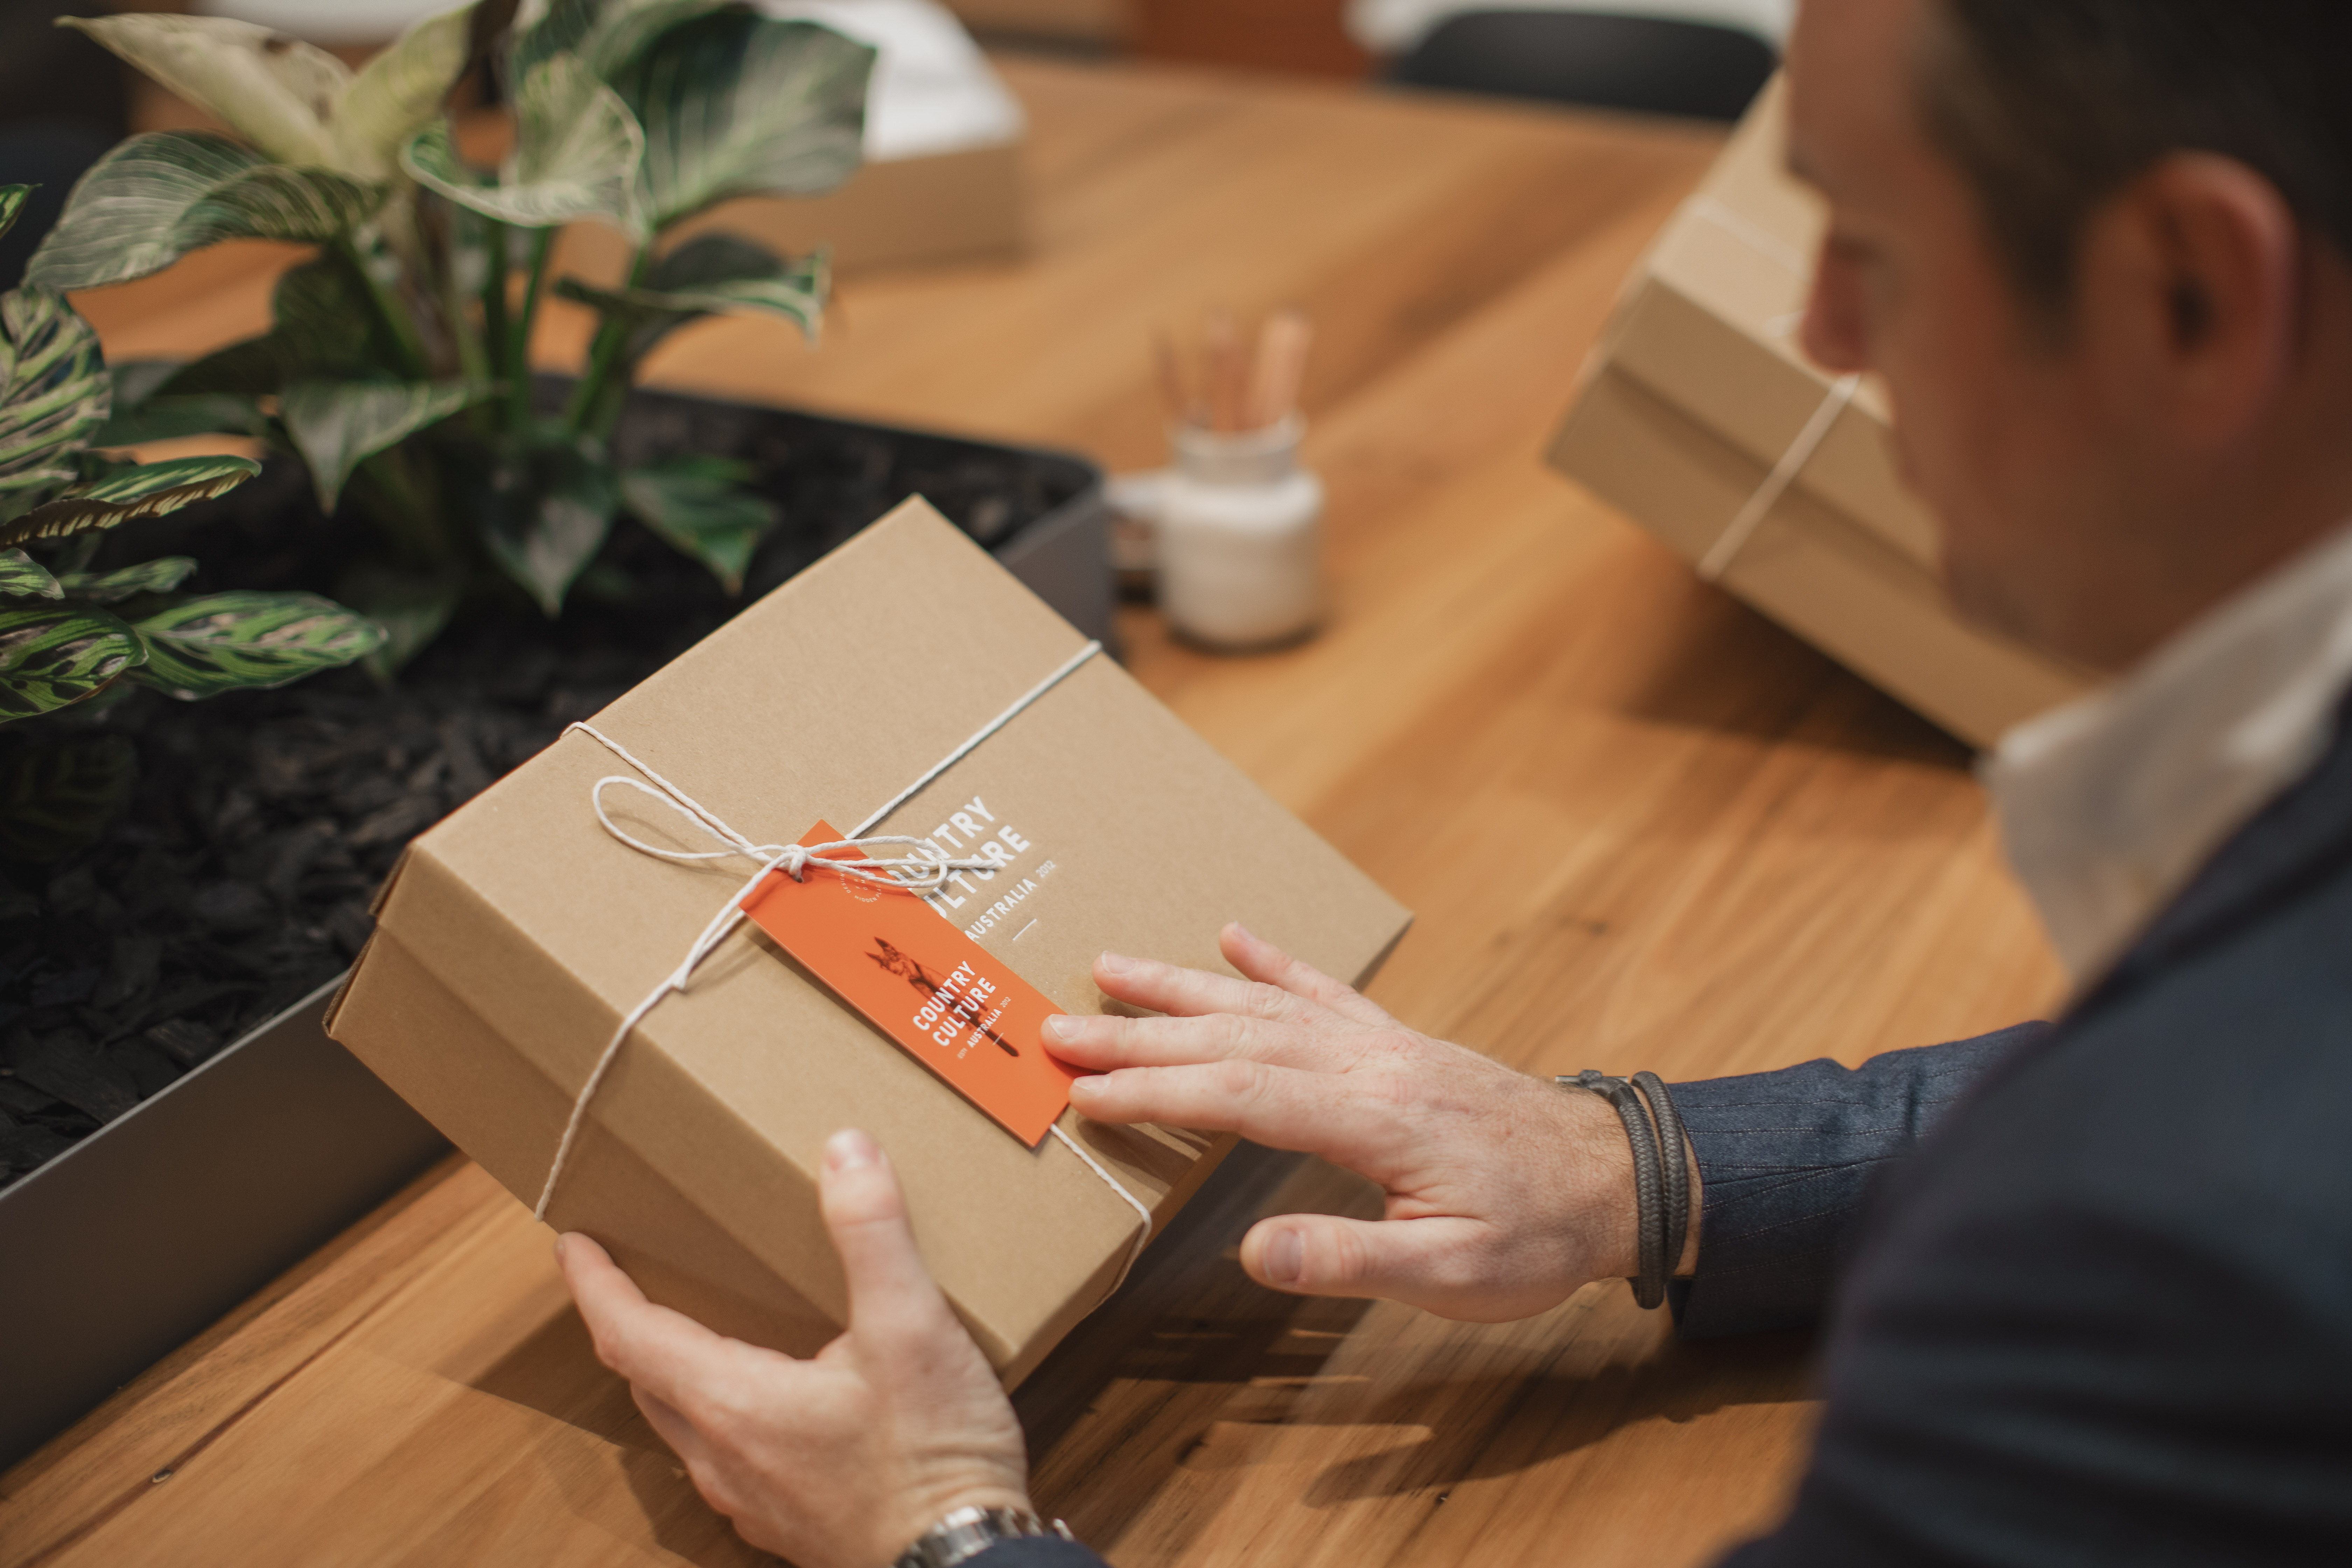 Redefining Traditional Gifting - Is it a Meaningful Gift or Just Merchandise?